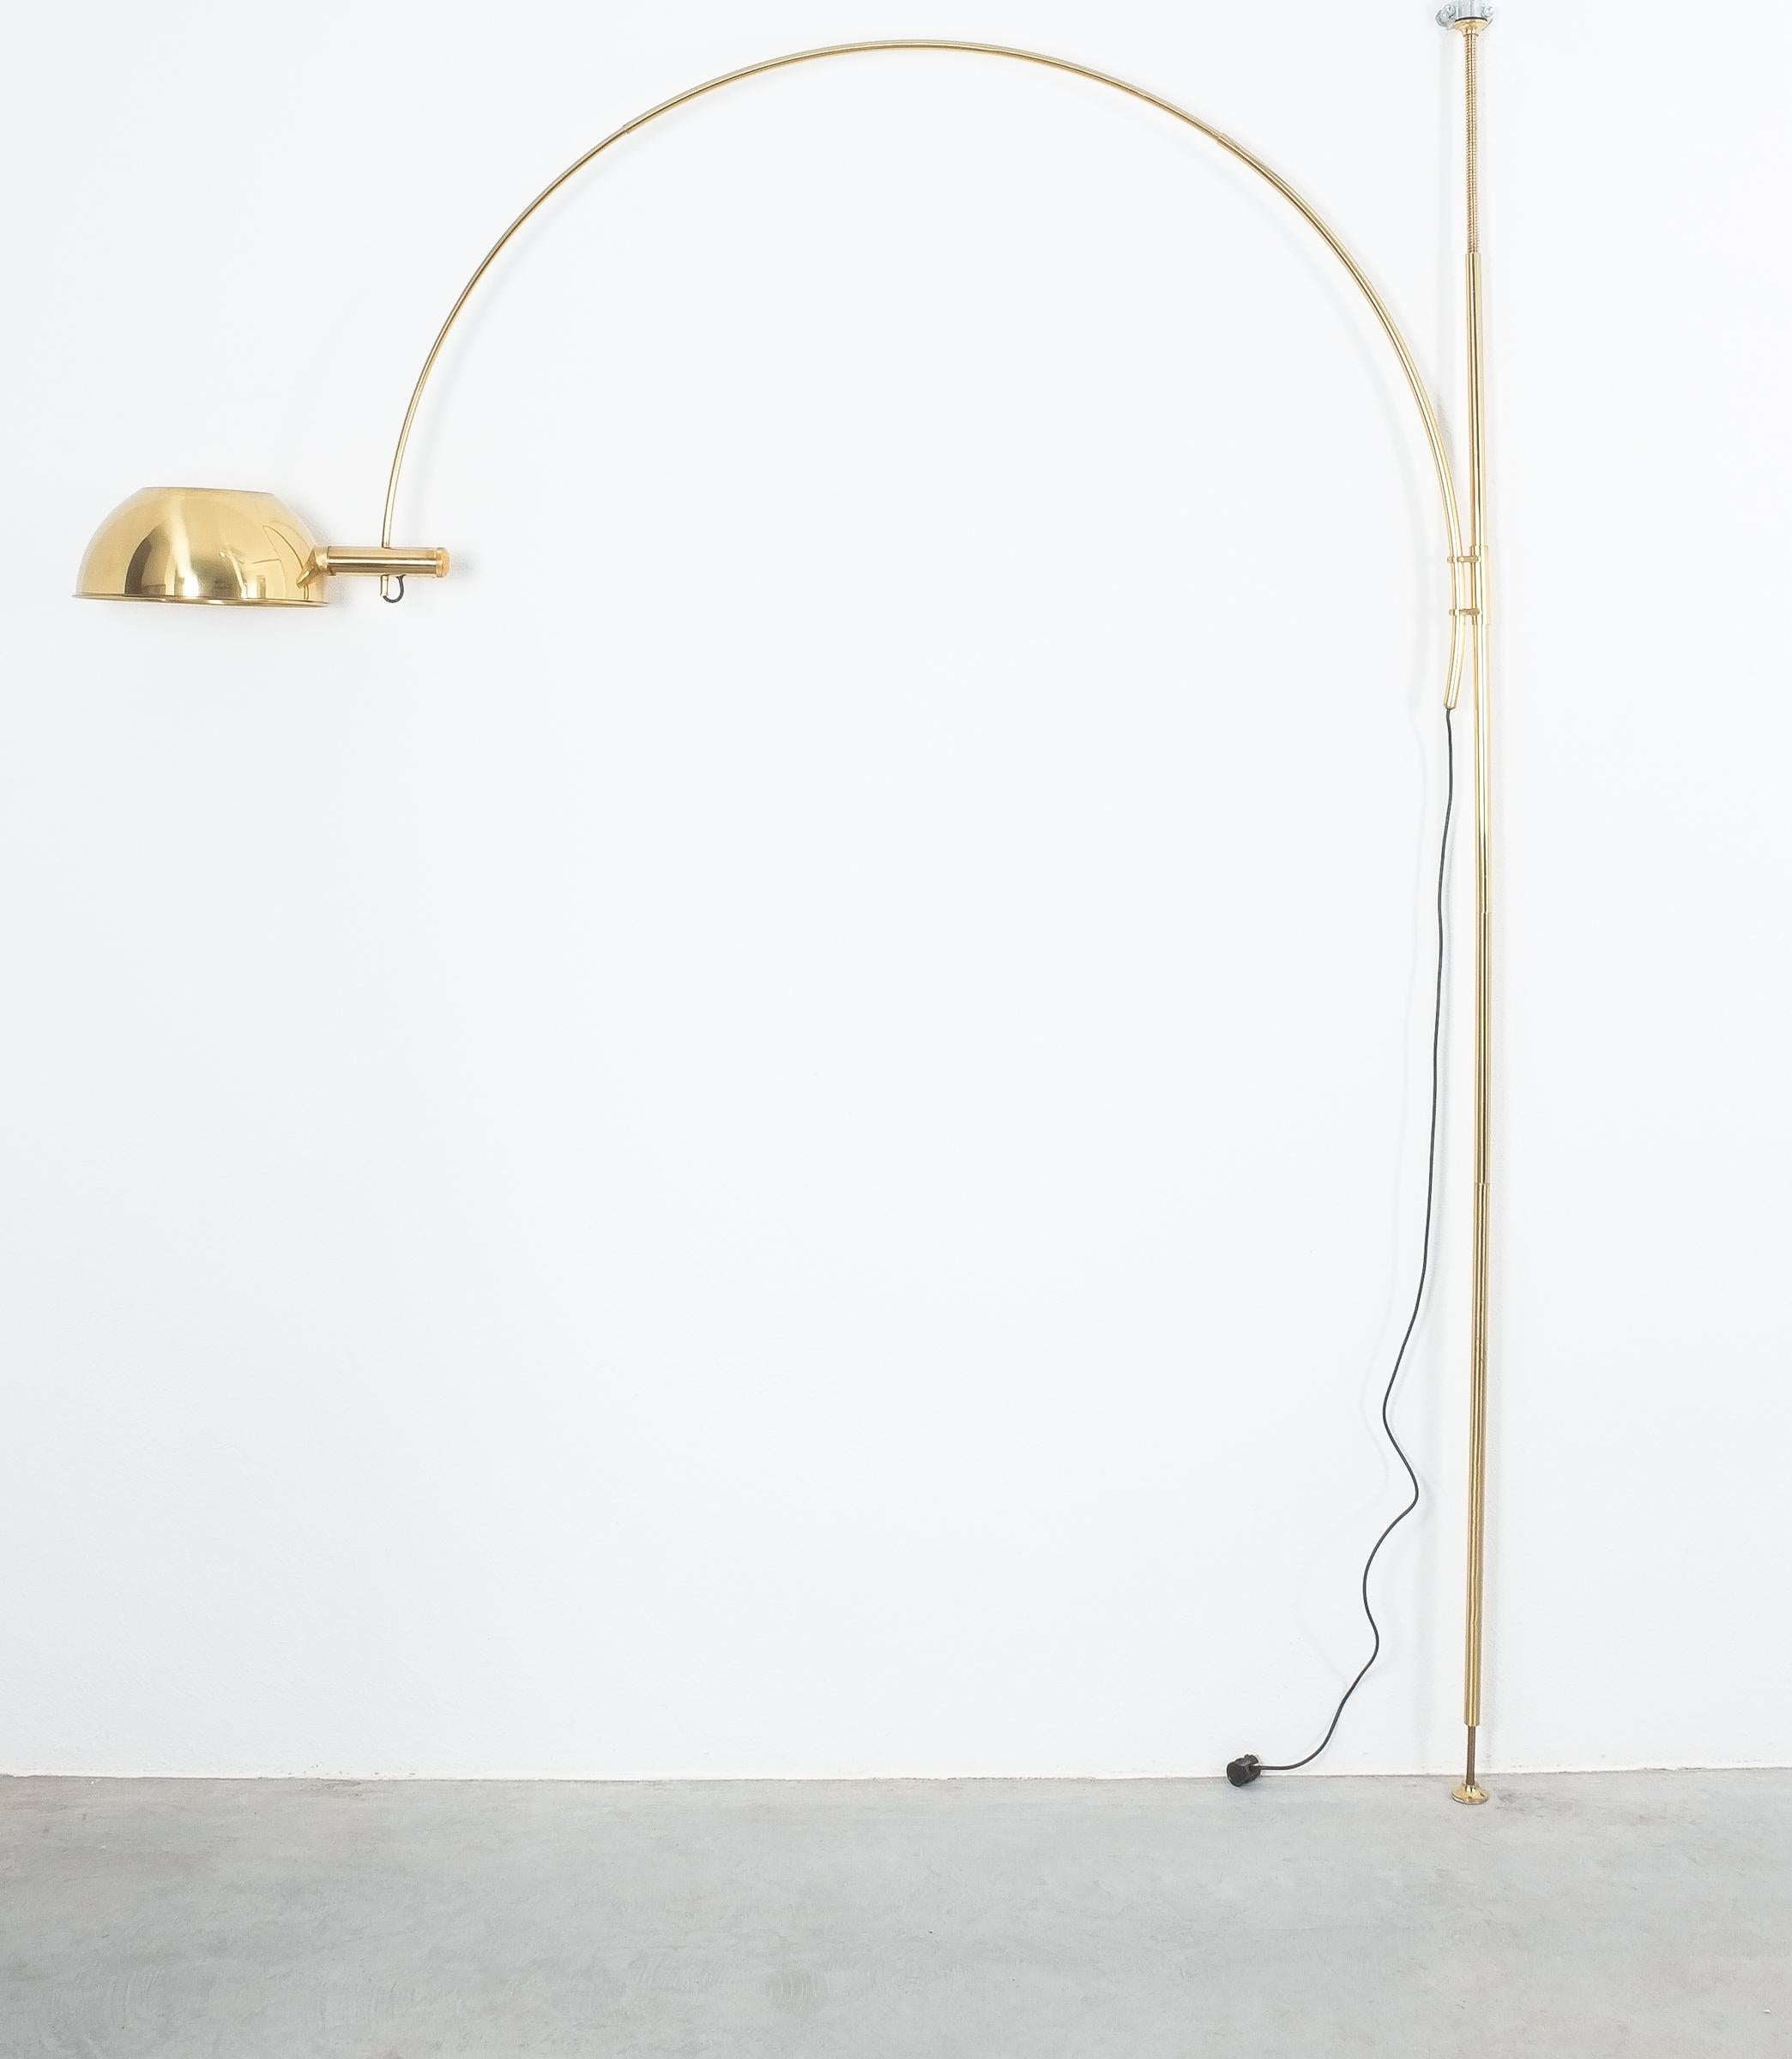 Giant floor lamp by Florian Schulz, Germany, 1970. This lamp is adjustable and can be pivoted in multiple positions, it is being designed for easily being clamped between ground and ceiling. It has an integrated brass switch at the back of the